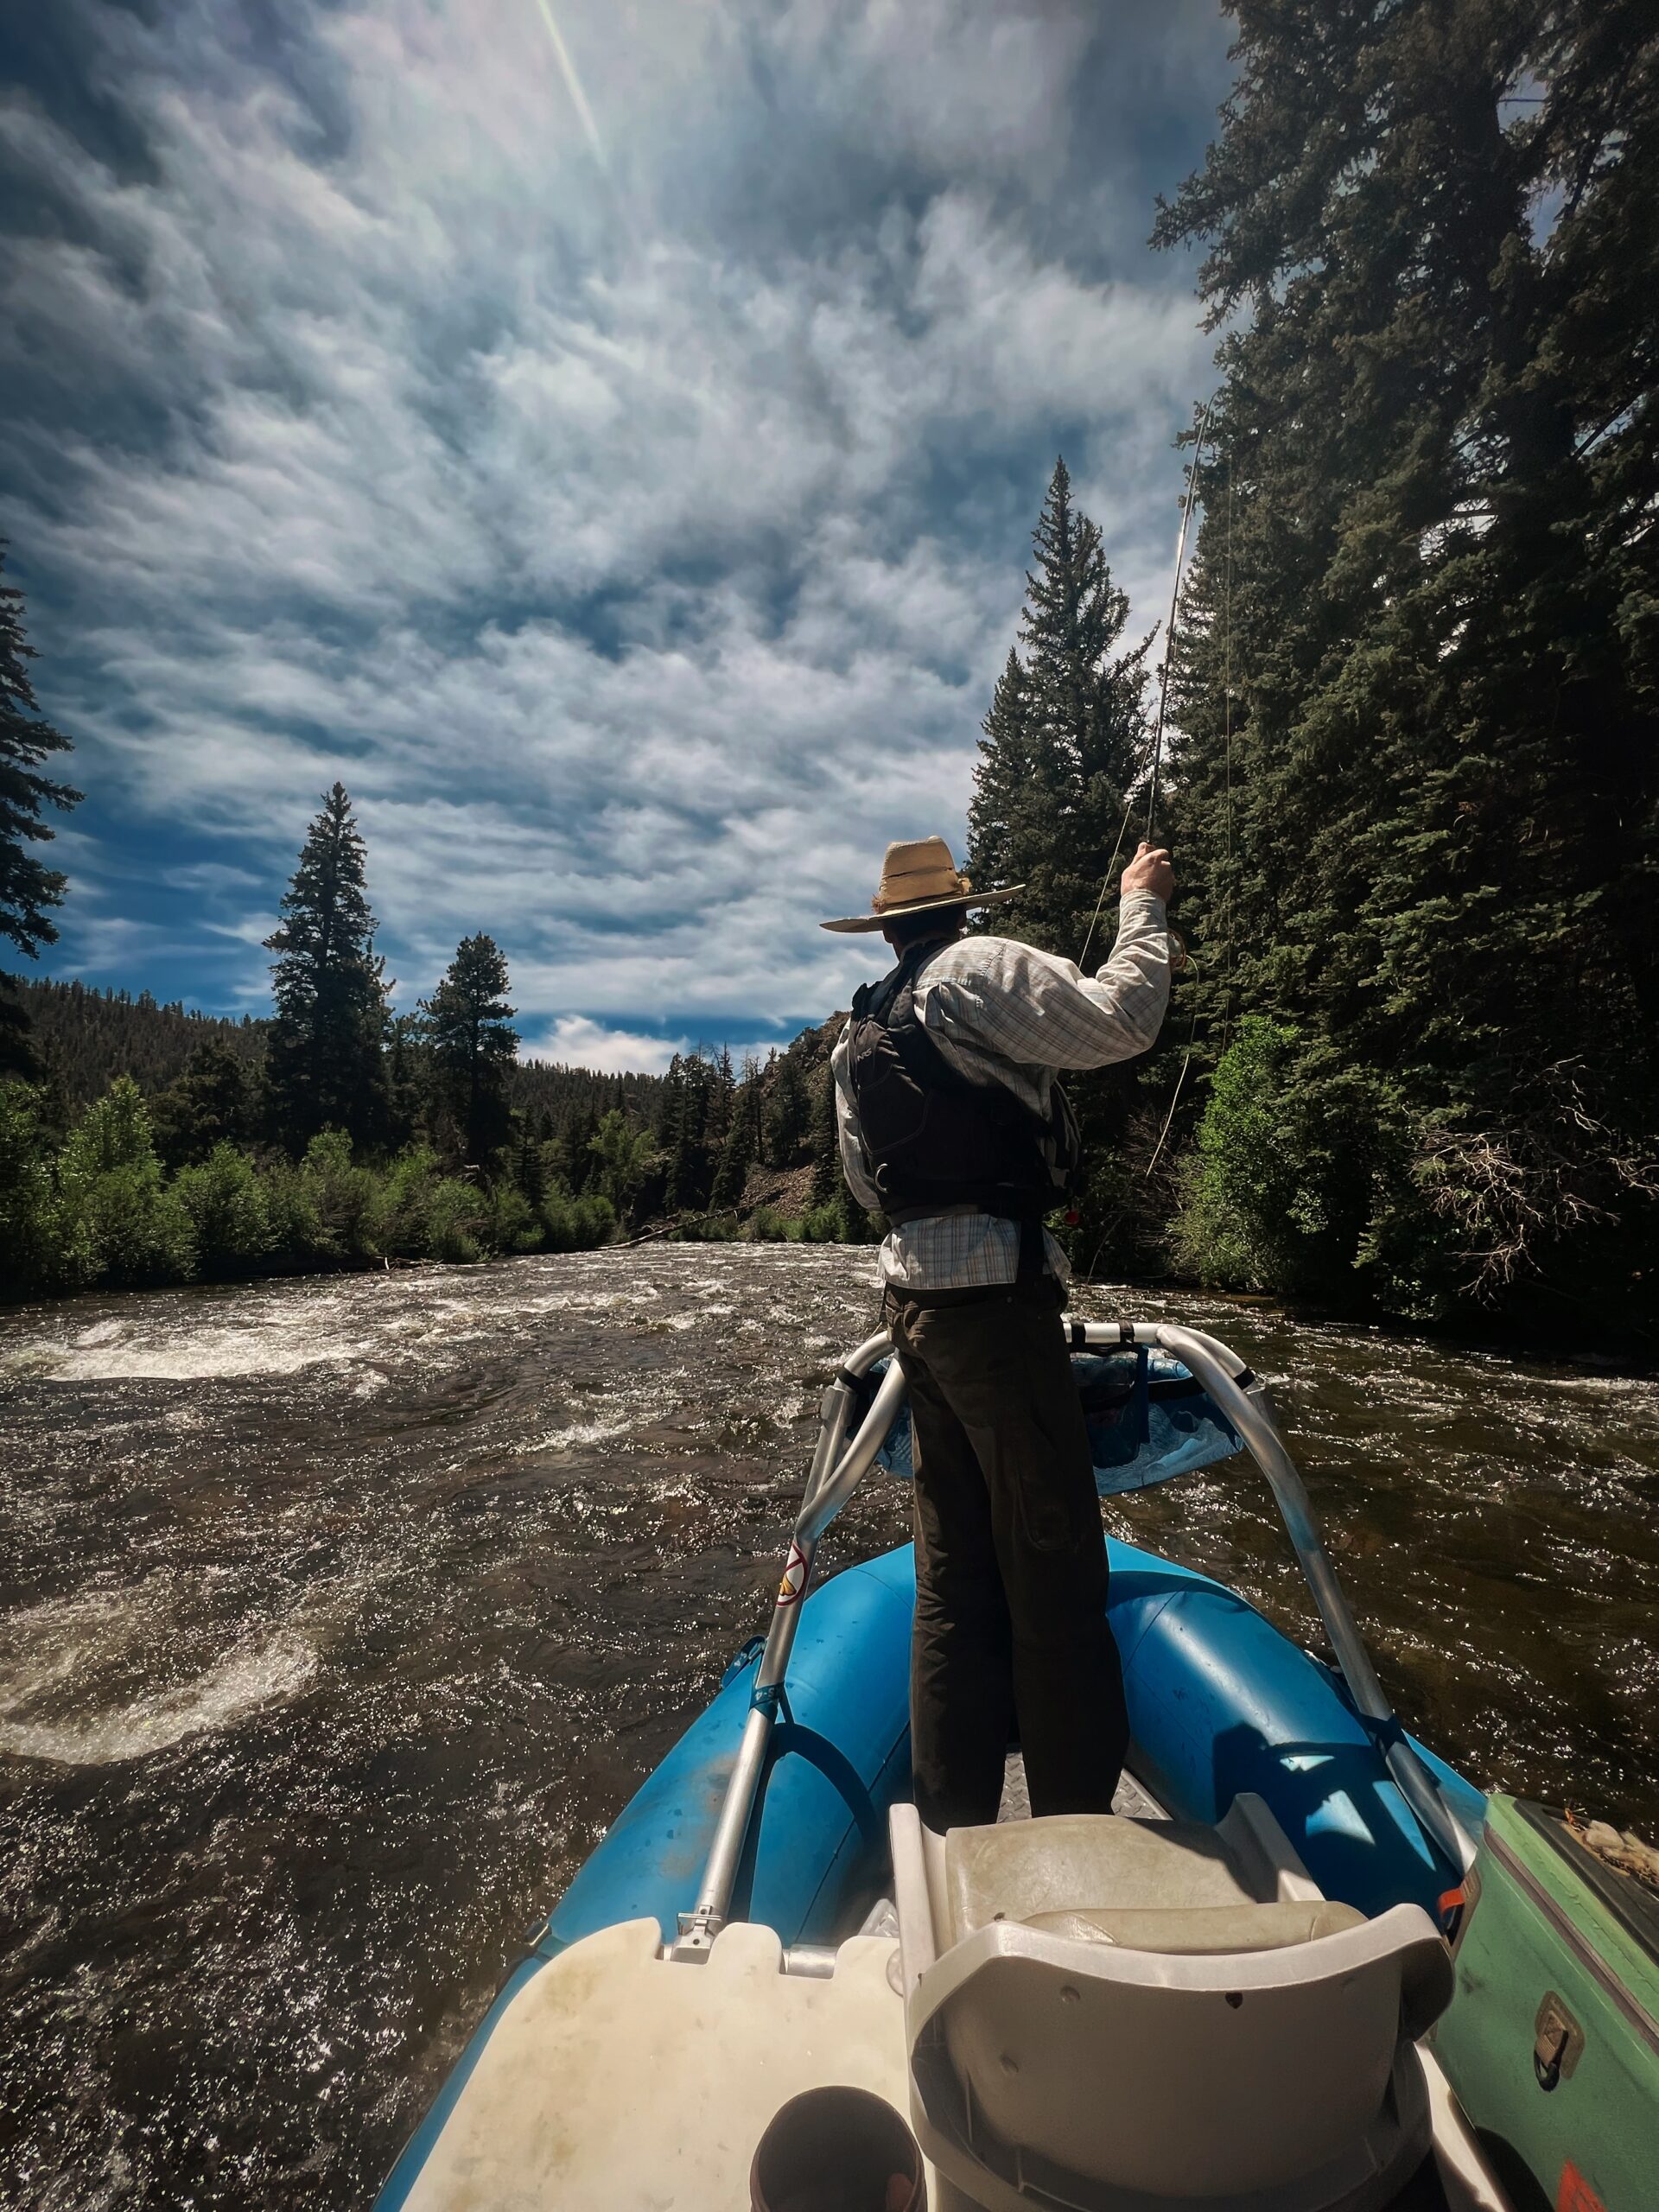 Fly fisherman standing on a boat, casting a line on a river surrounded by tall pine trees under a cloudy sky.